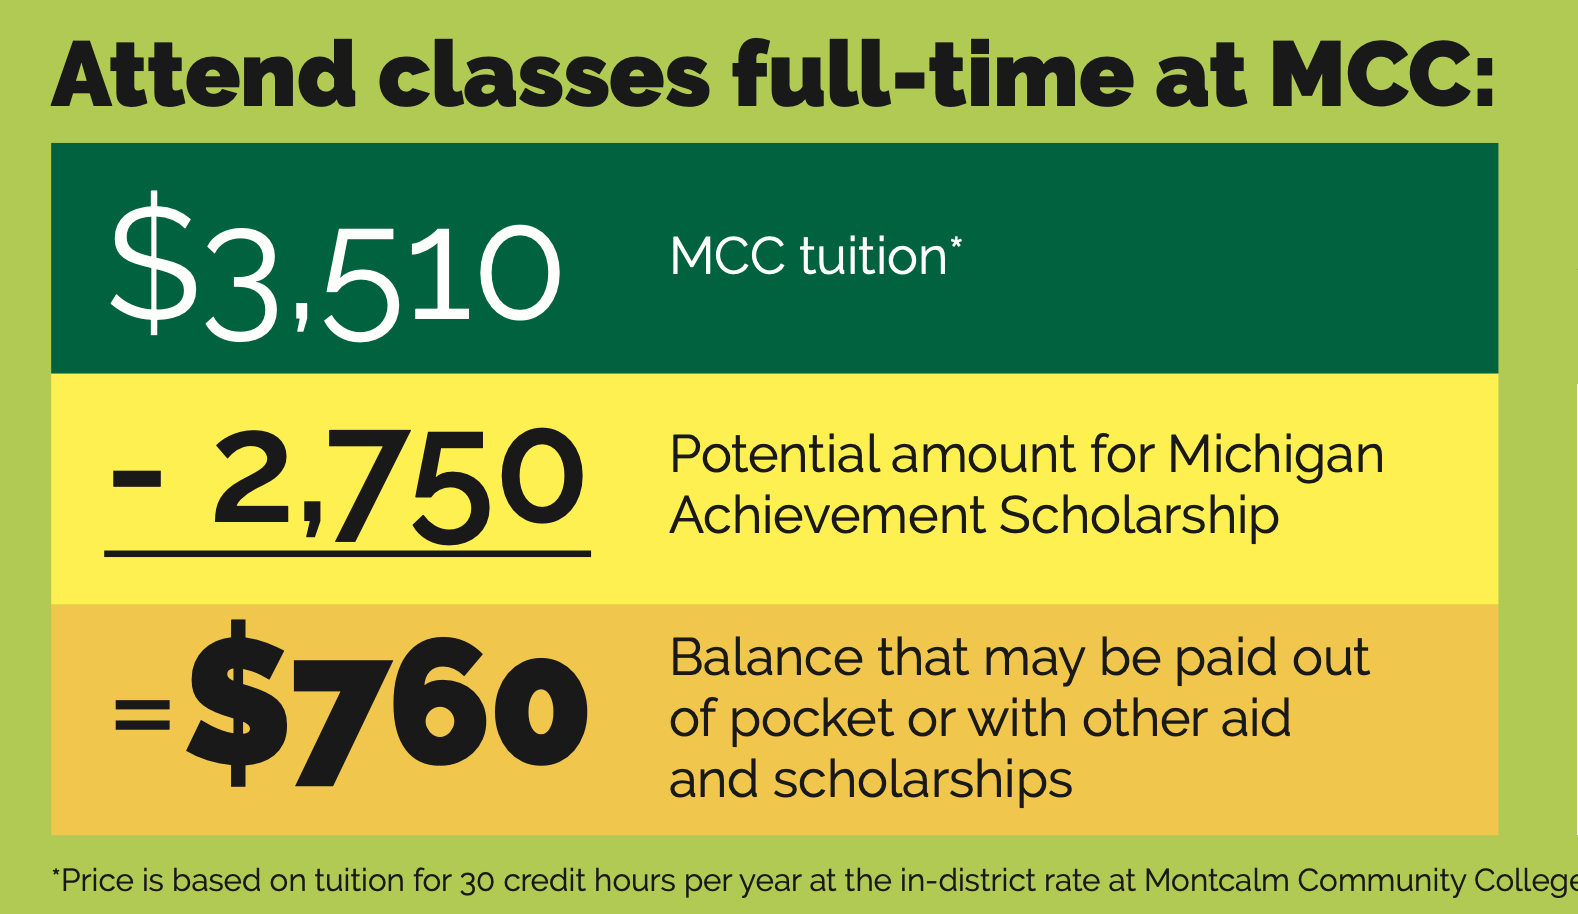 After the Michigan Achievement Scholarship, students would owe $760 for the year taking 30 credits.